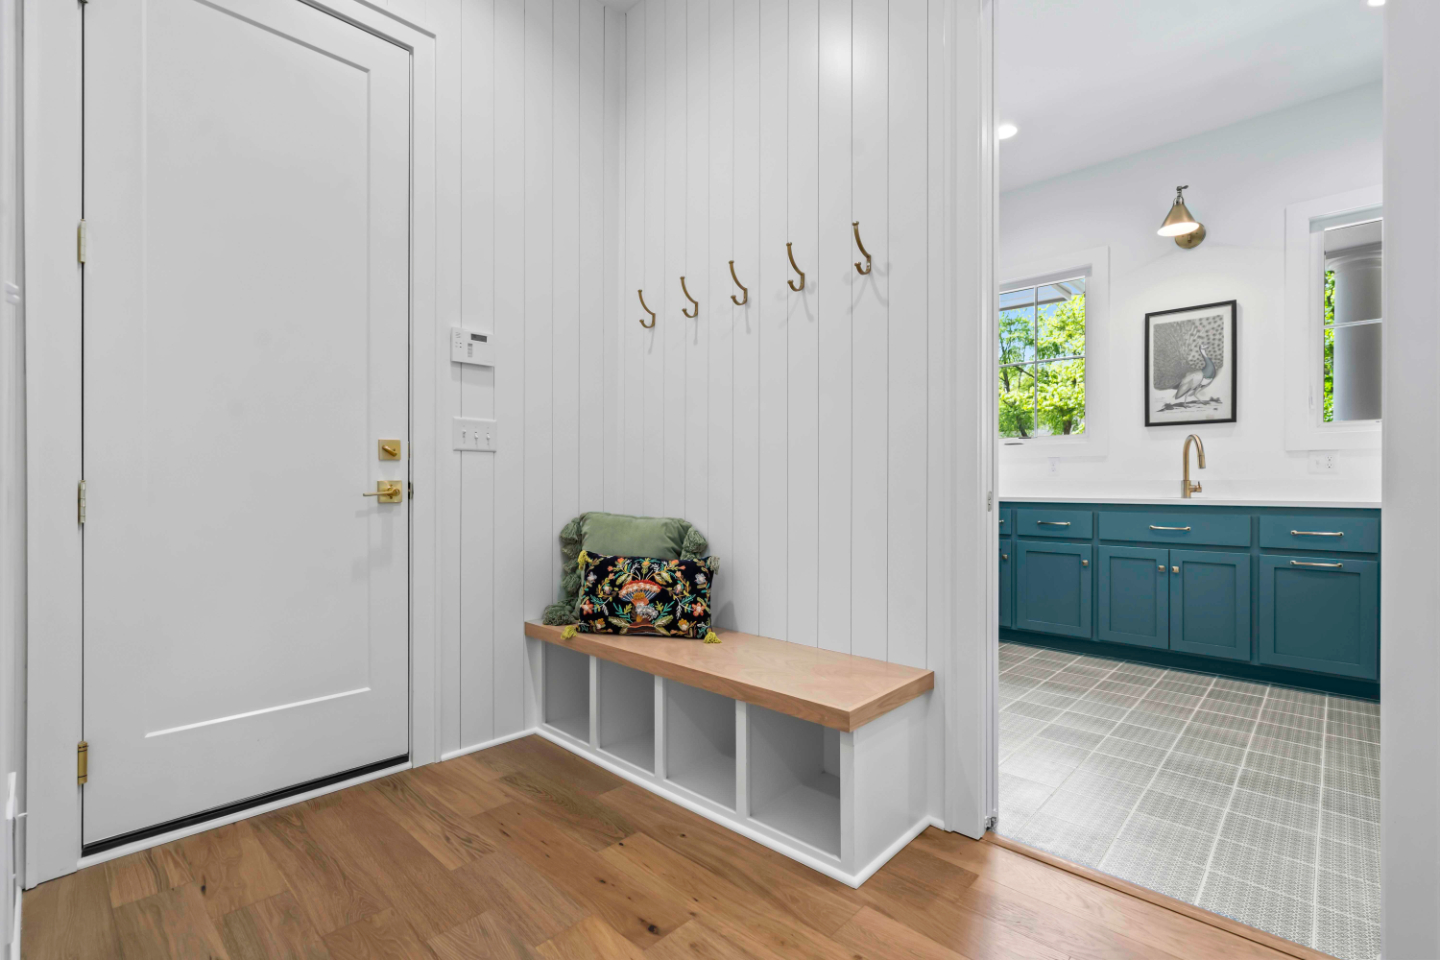 Mudroom off the laundry room